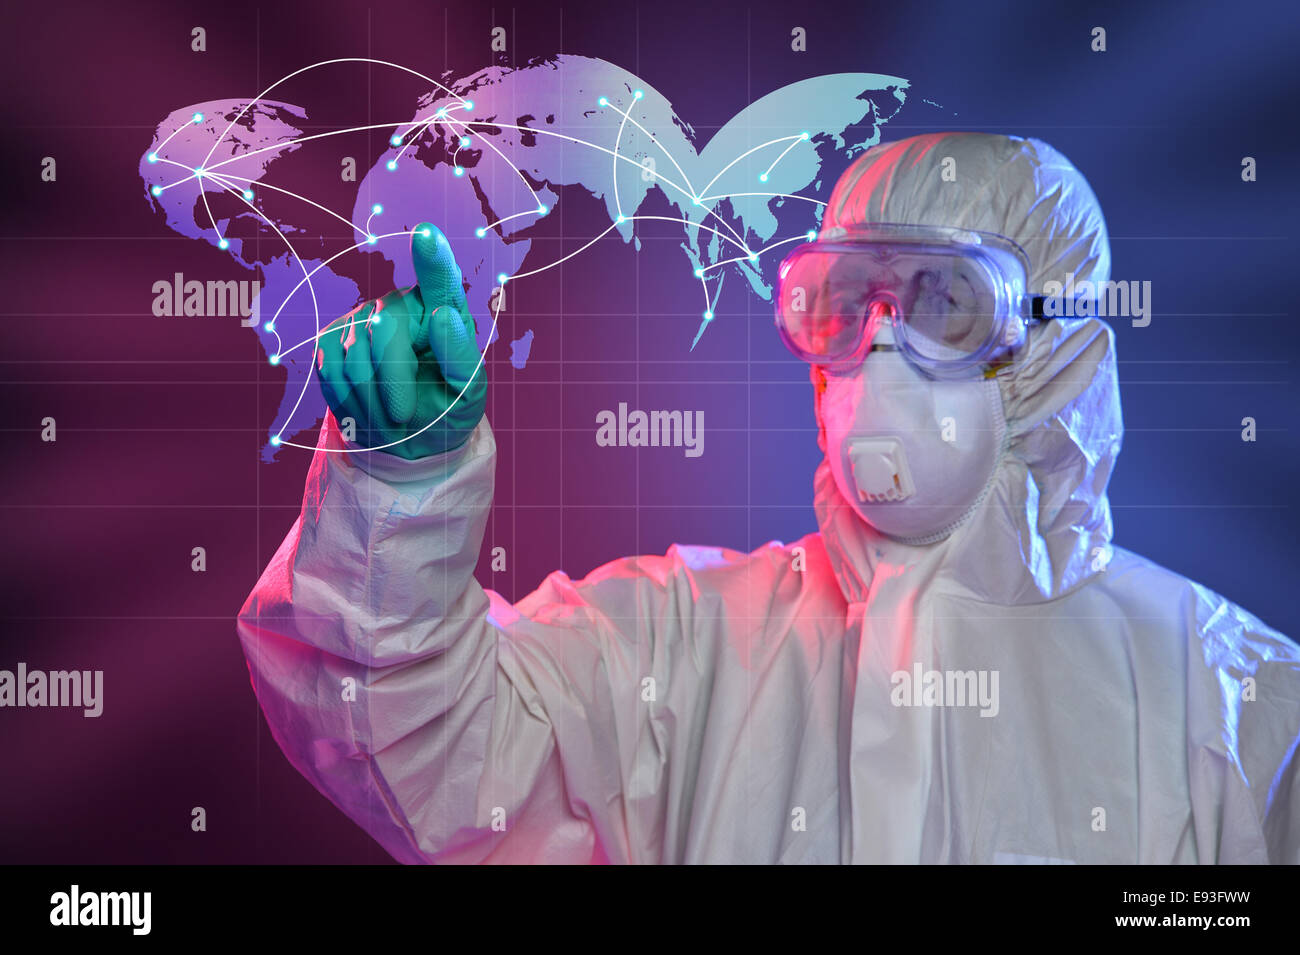 Scientist in Hazmat suit and protective gear pointing at origin of Ebola virus Stock Photo